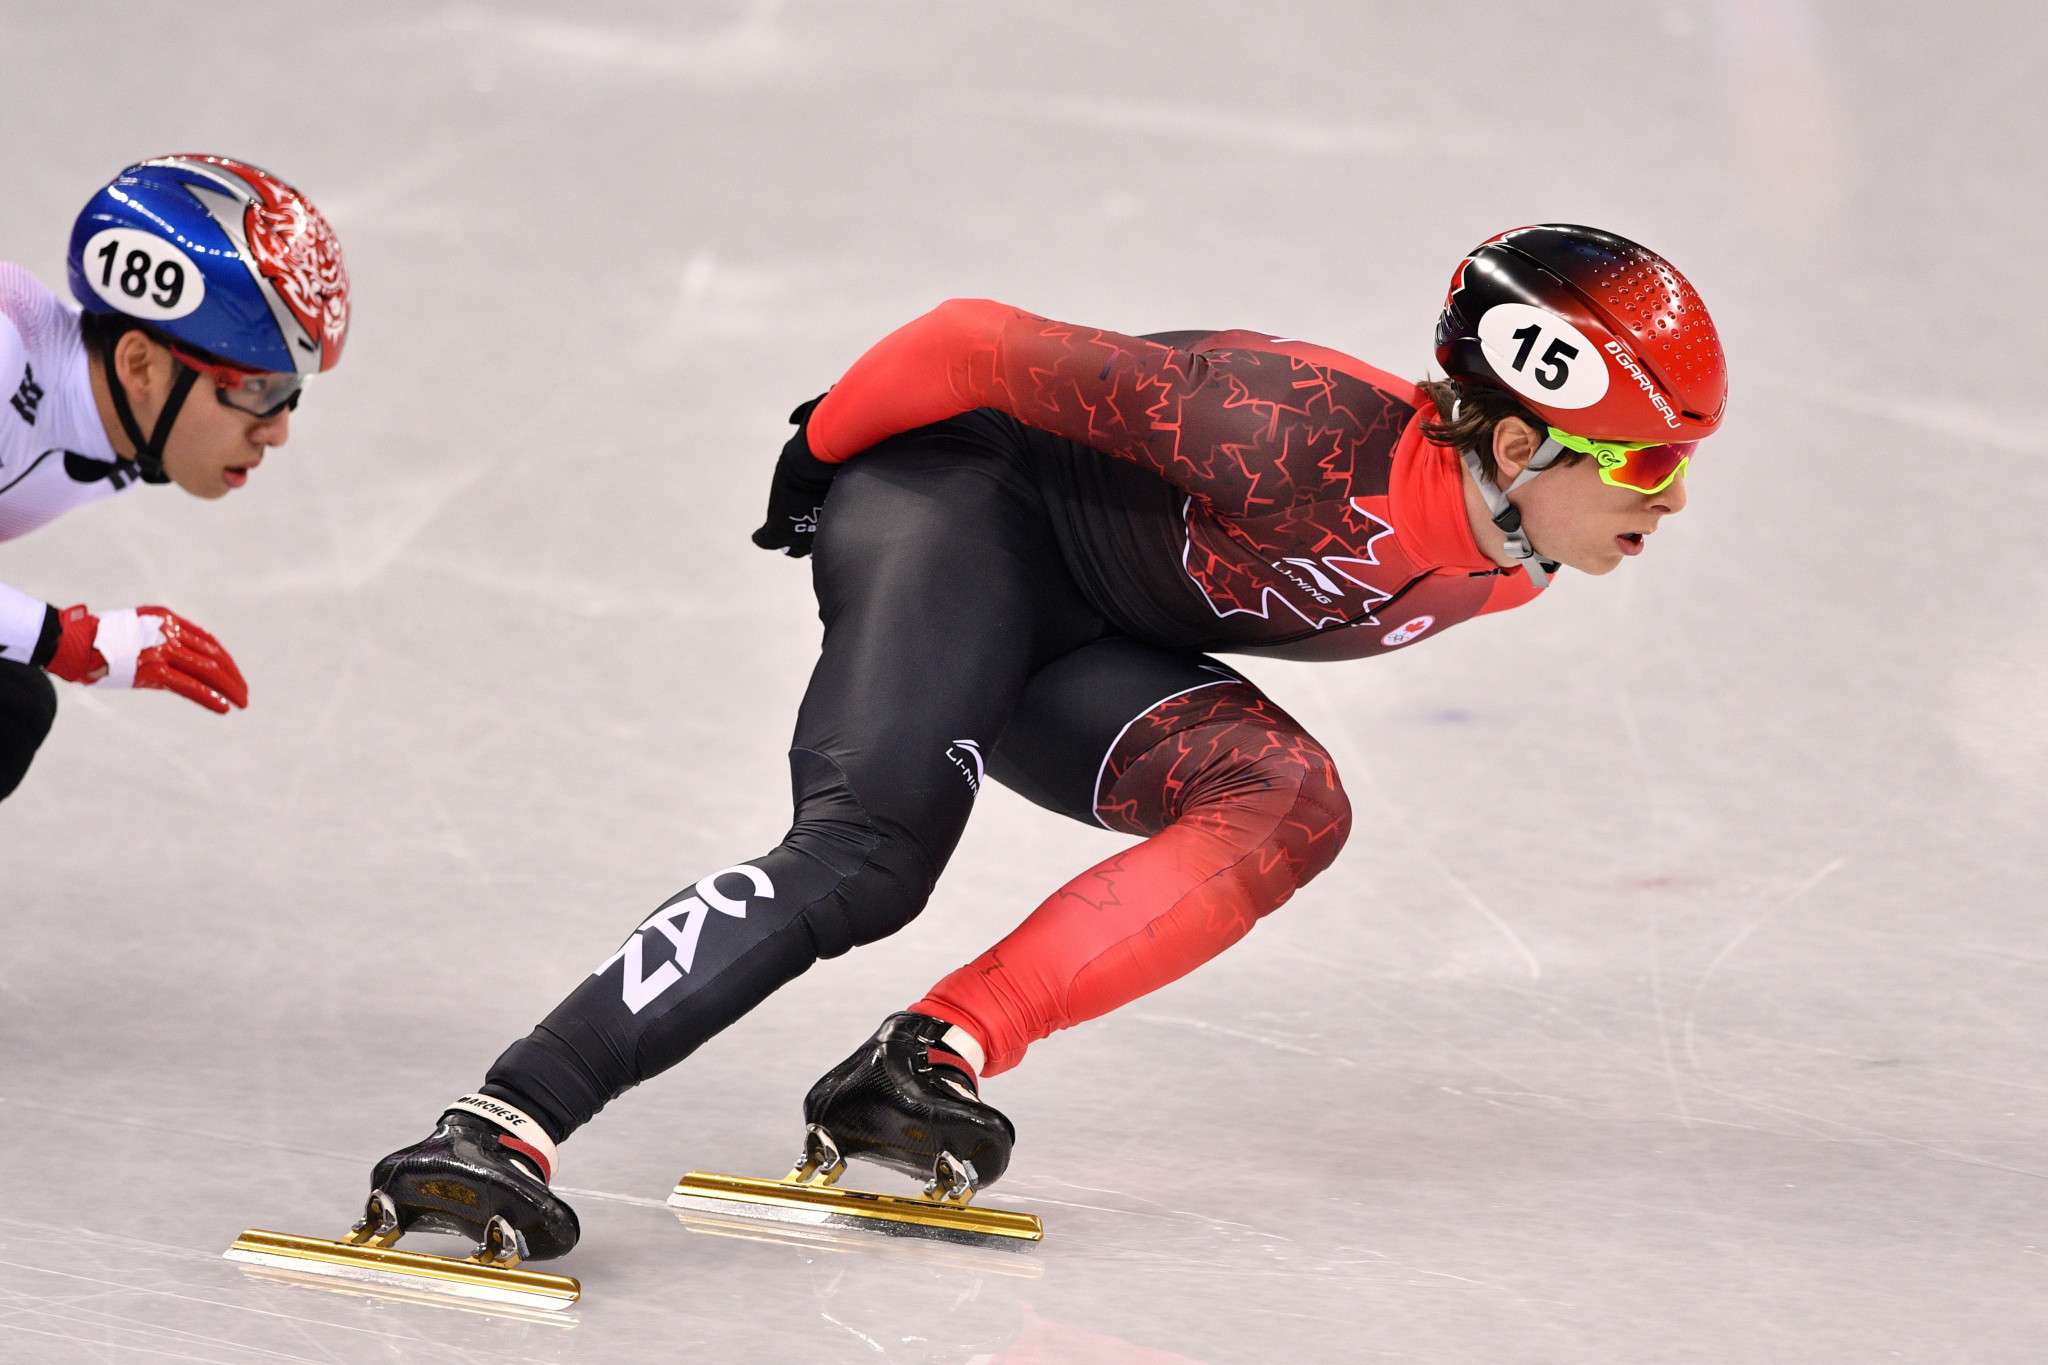 Charle Cournoyer has retired from short track speed skating ©Getty Images